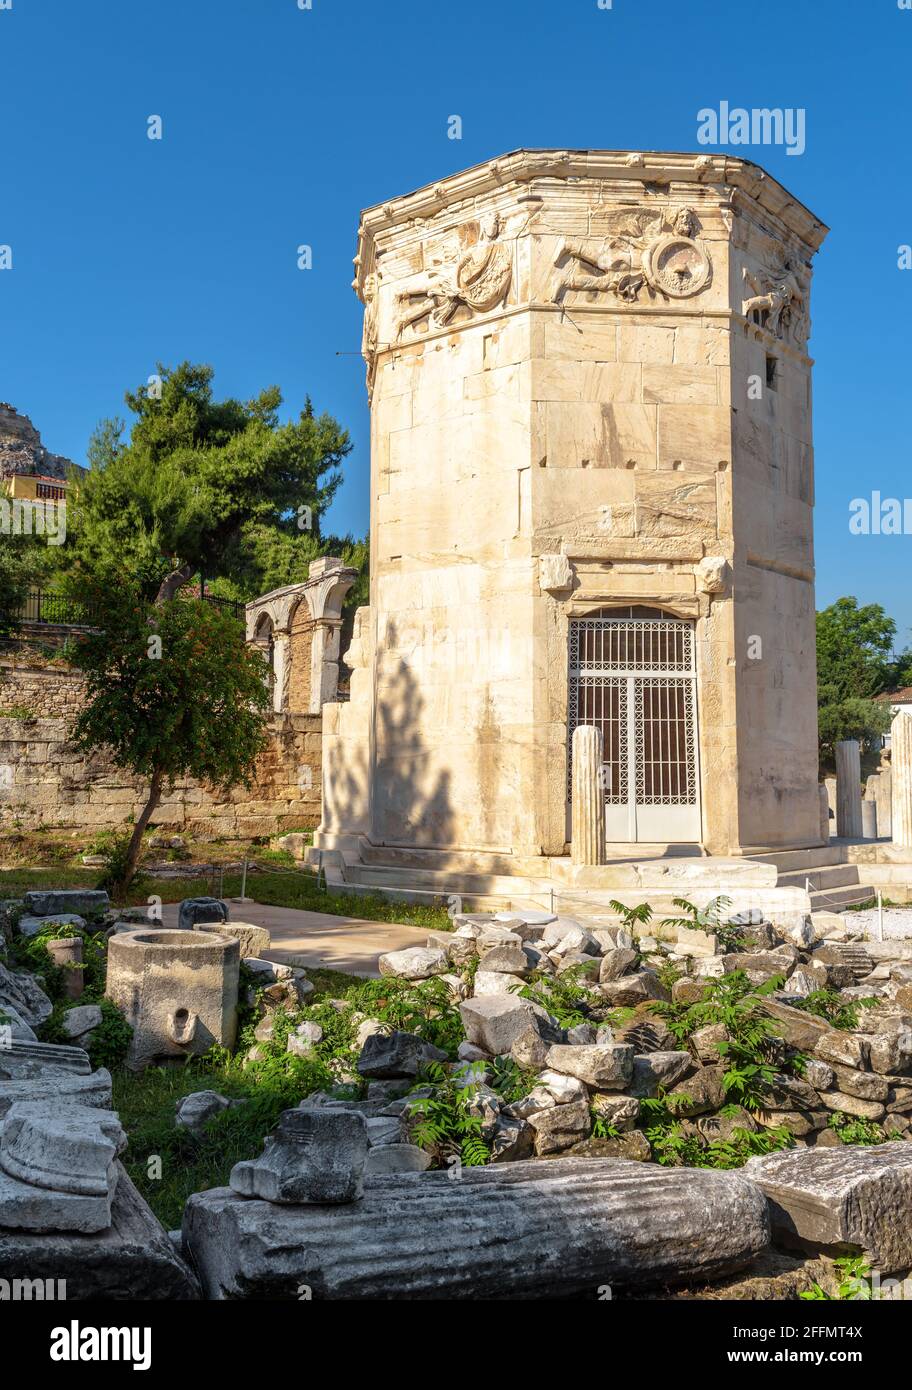 Tower of Winds or Aerides in Roman Agora, Athens, Greece. It is landmark of Athens. Ancient Greek ruins in Athens city center at Plaka district. Conce Stock Photo